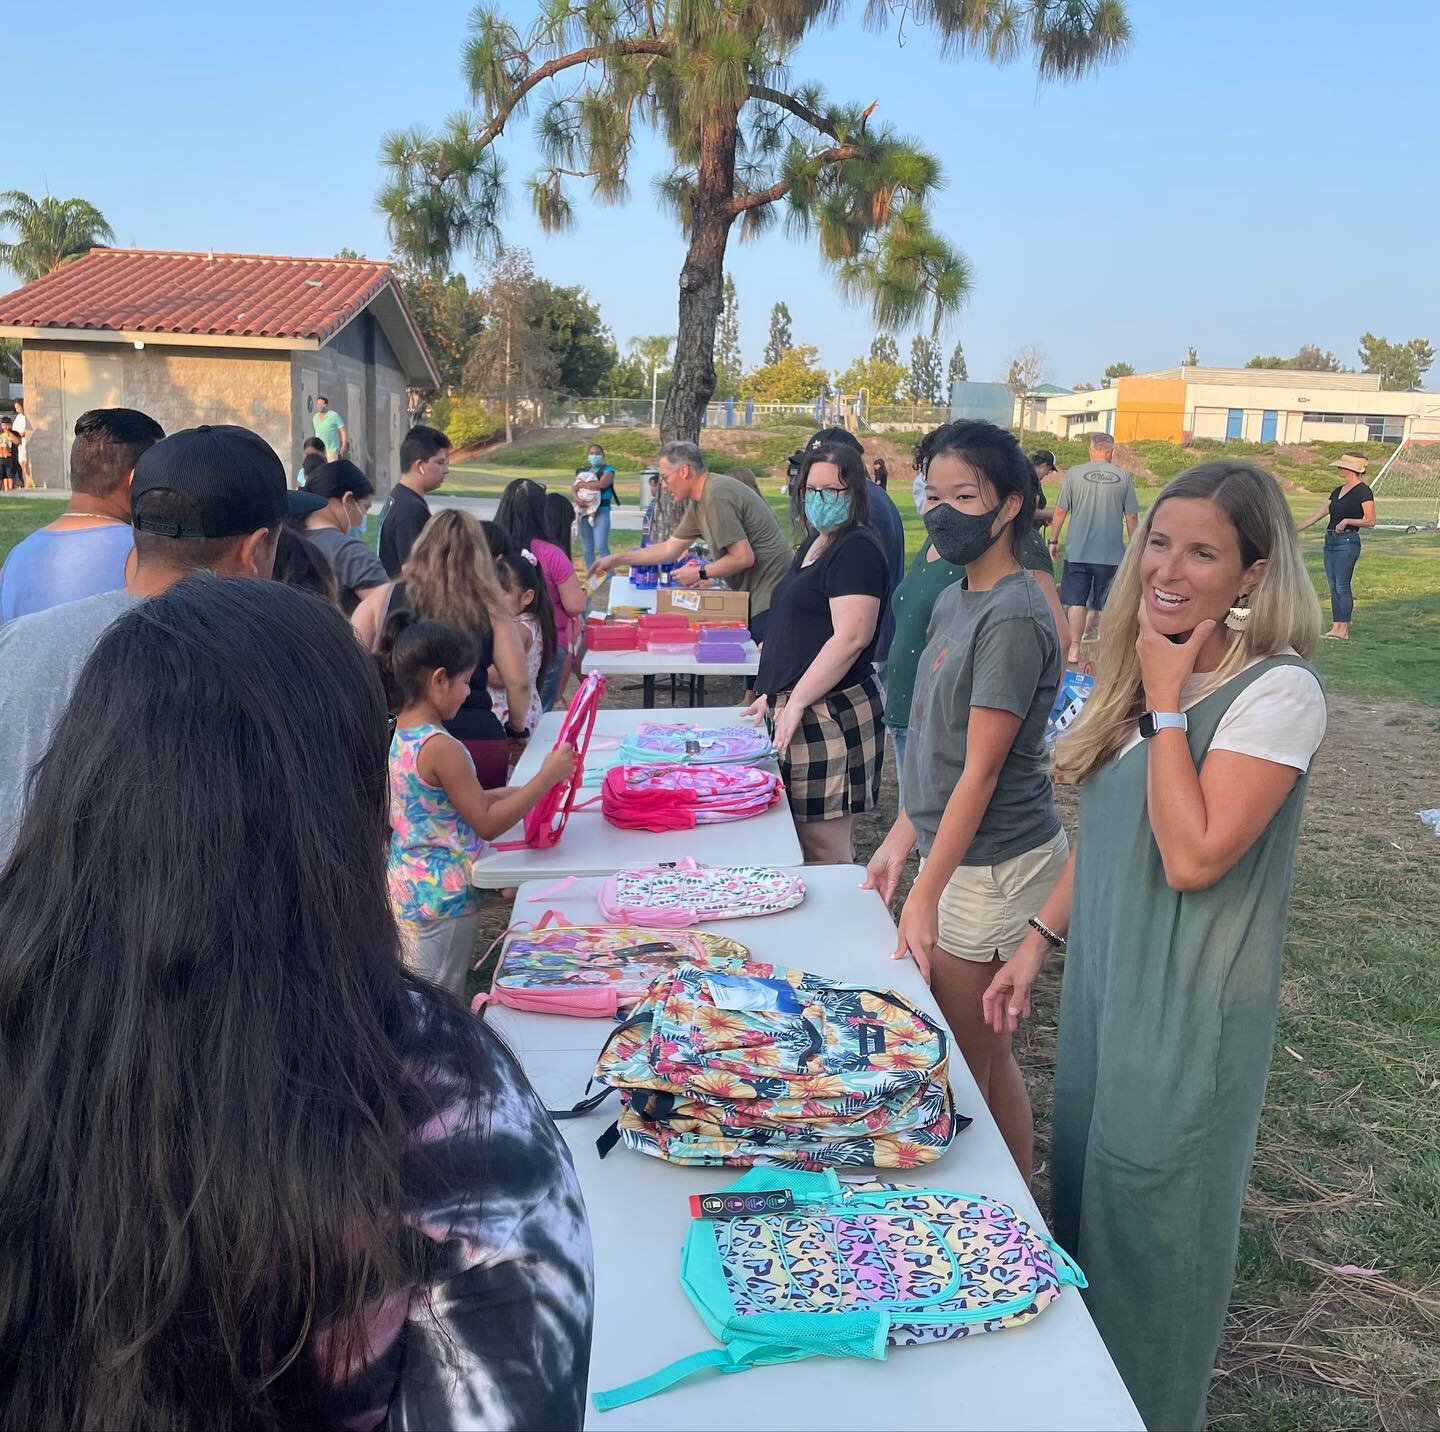 In 2017, friends from a local church discovered the need for school supplies and backpacks for students at their neighborhood elementary school in Laguna Niguel.

They gathered some donations, bought as many backpacks as they could, and collected sch